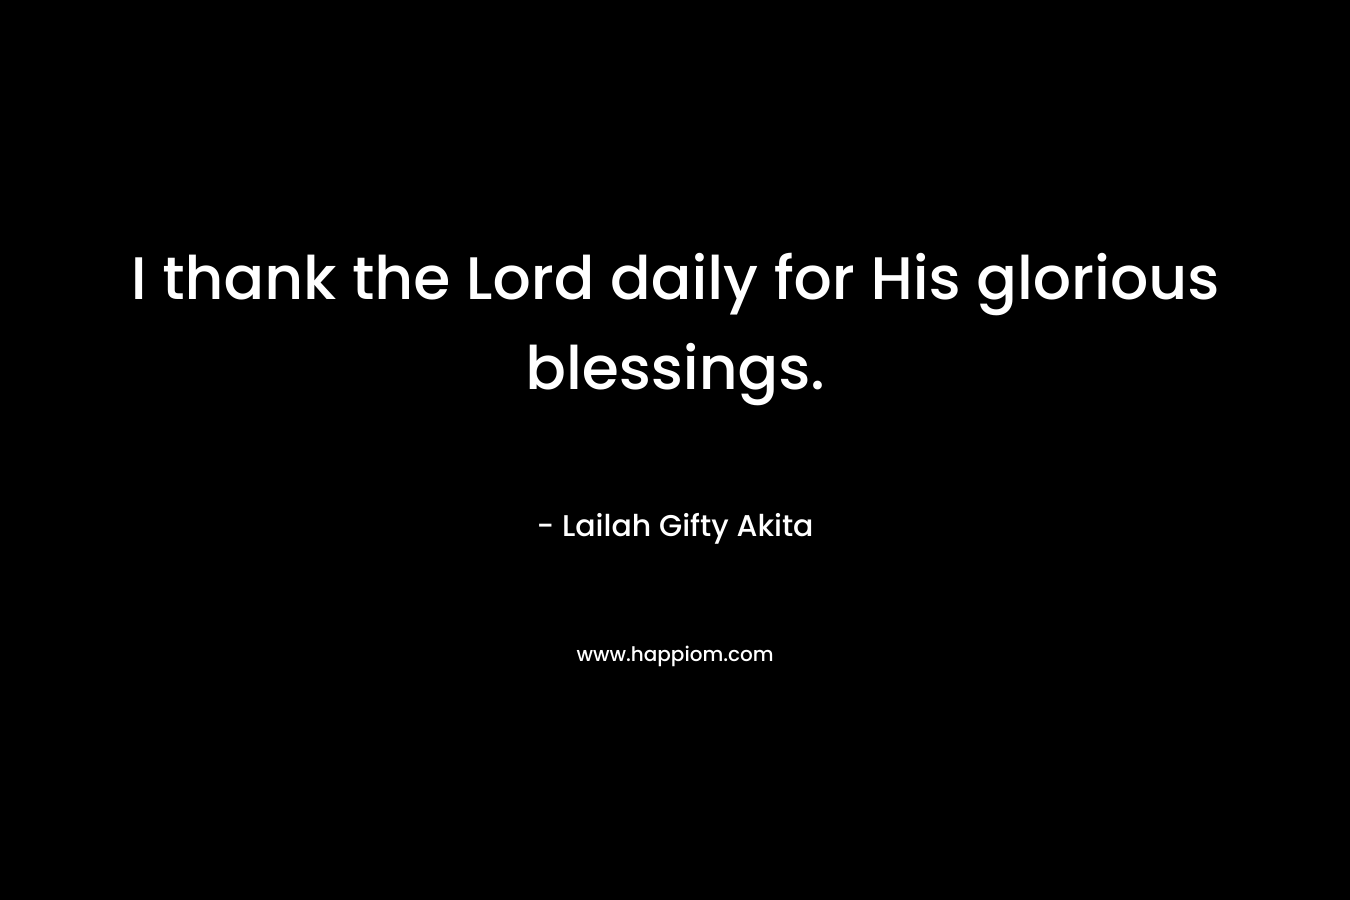 I thank the Lord daily for His glorious blessings.